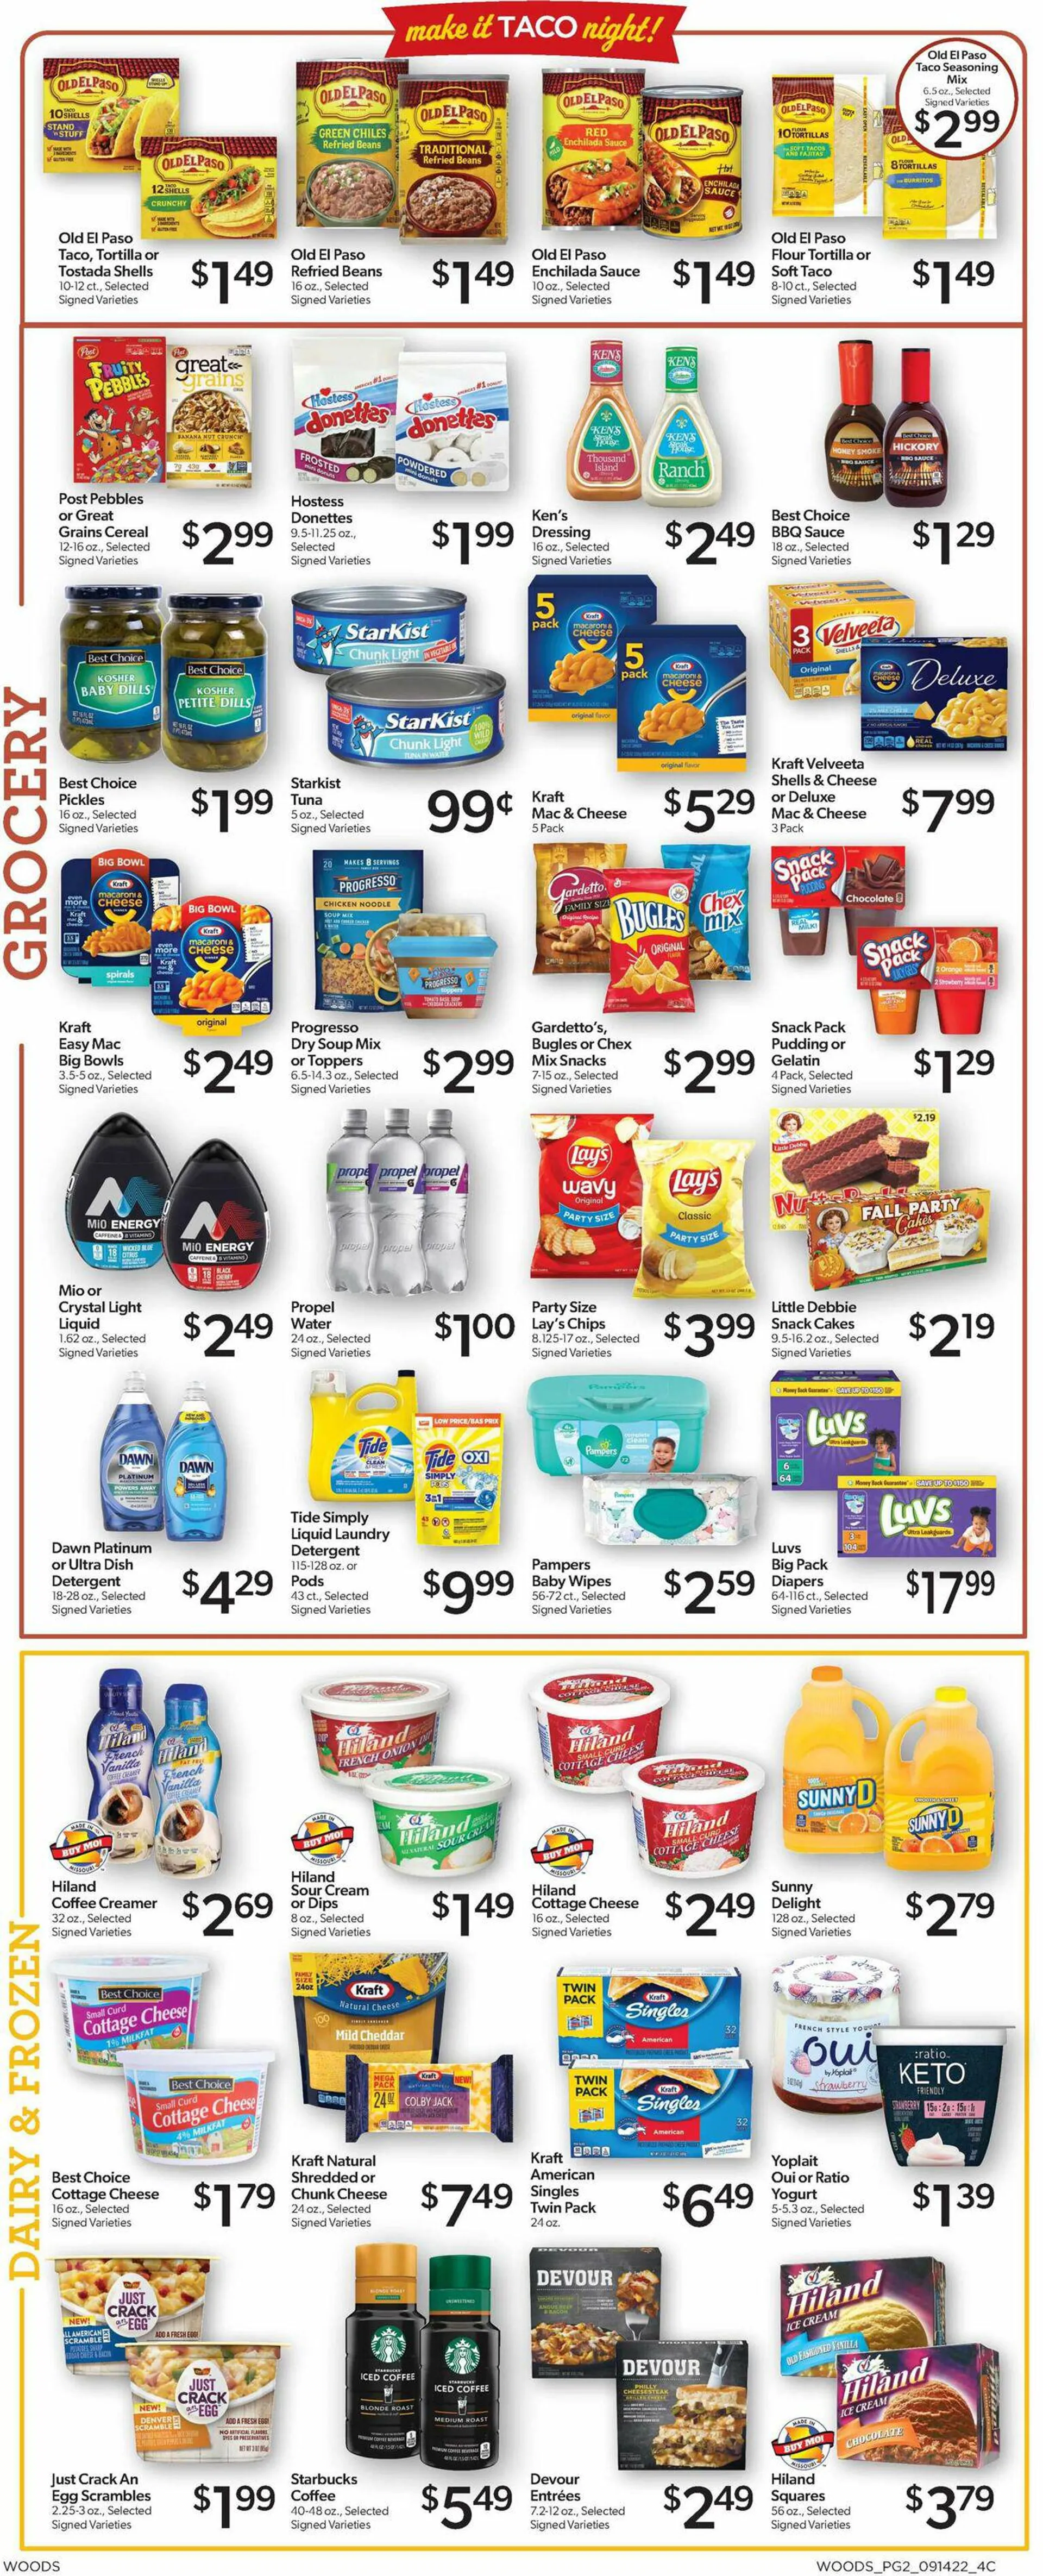 Woods Supermarket Current weekly ad - 2